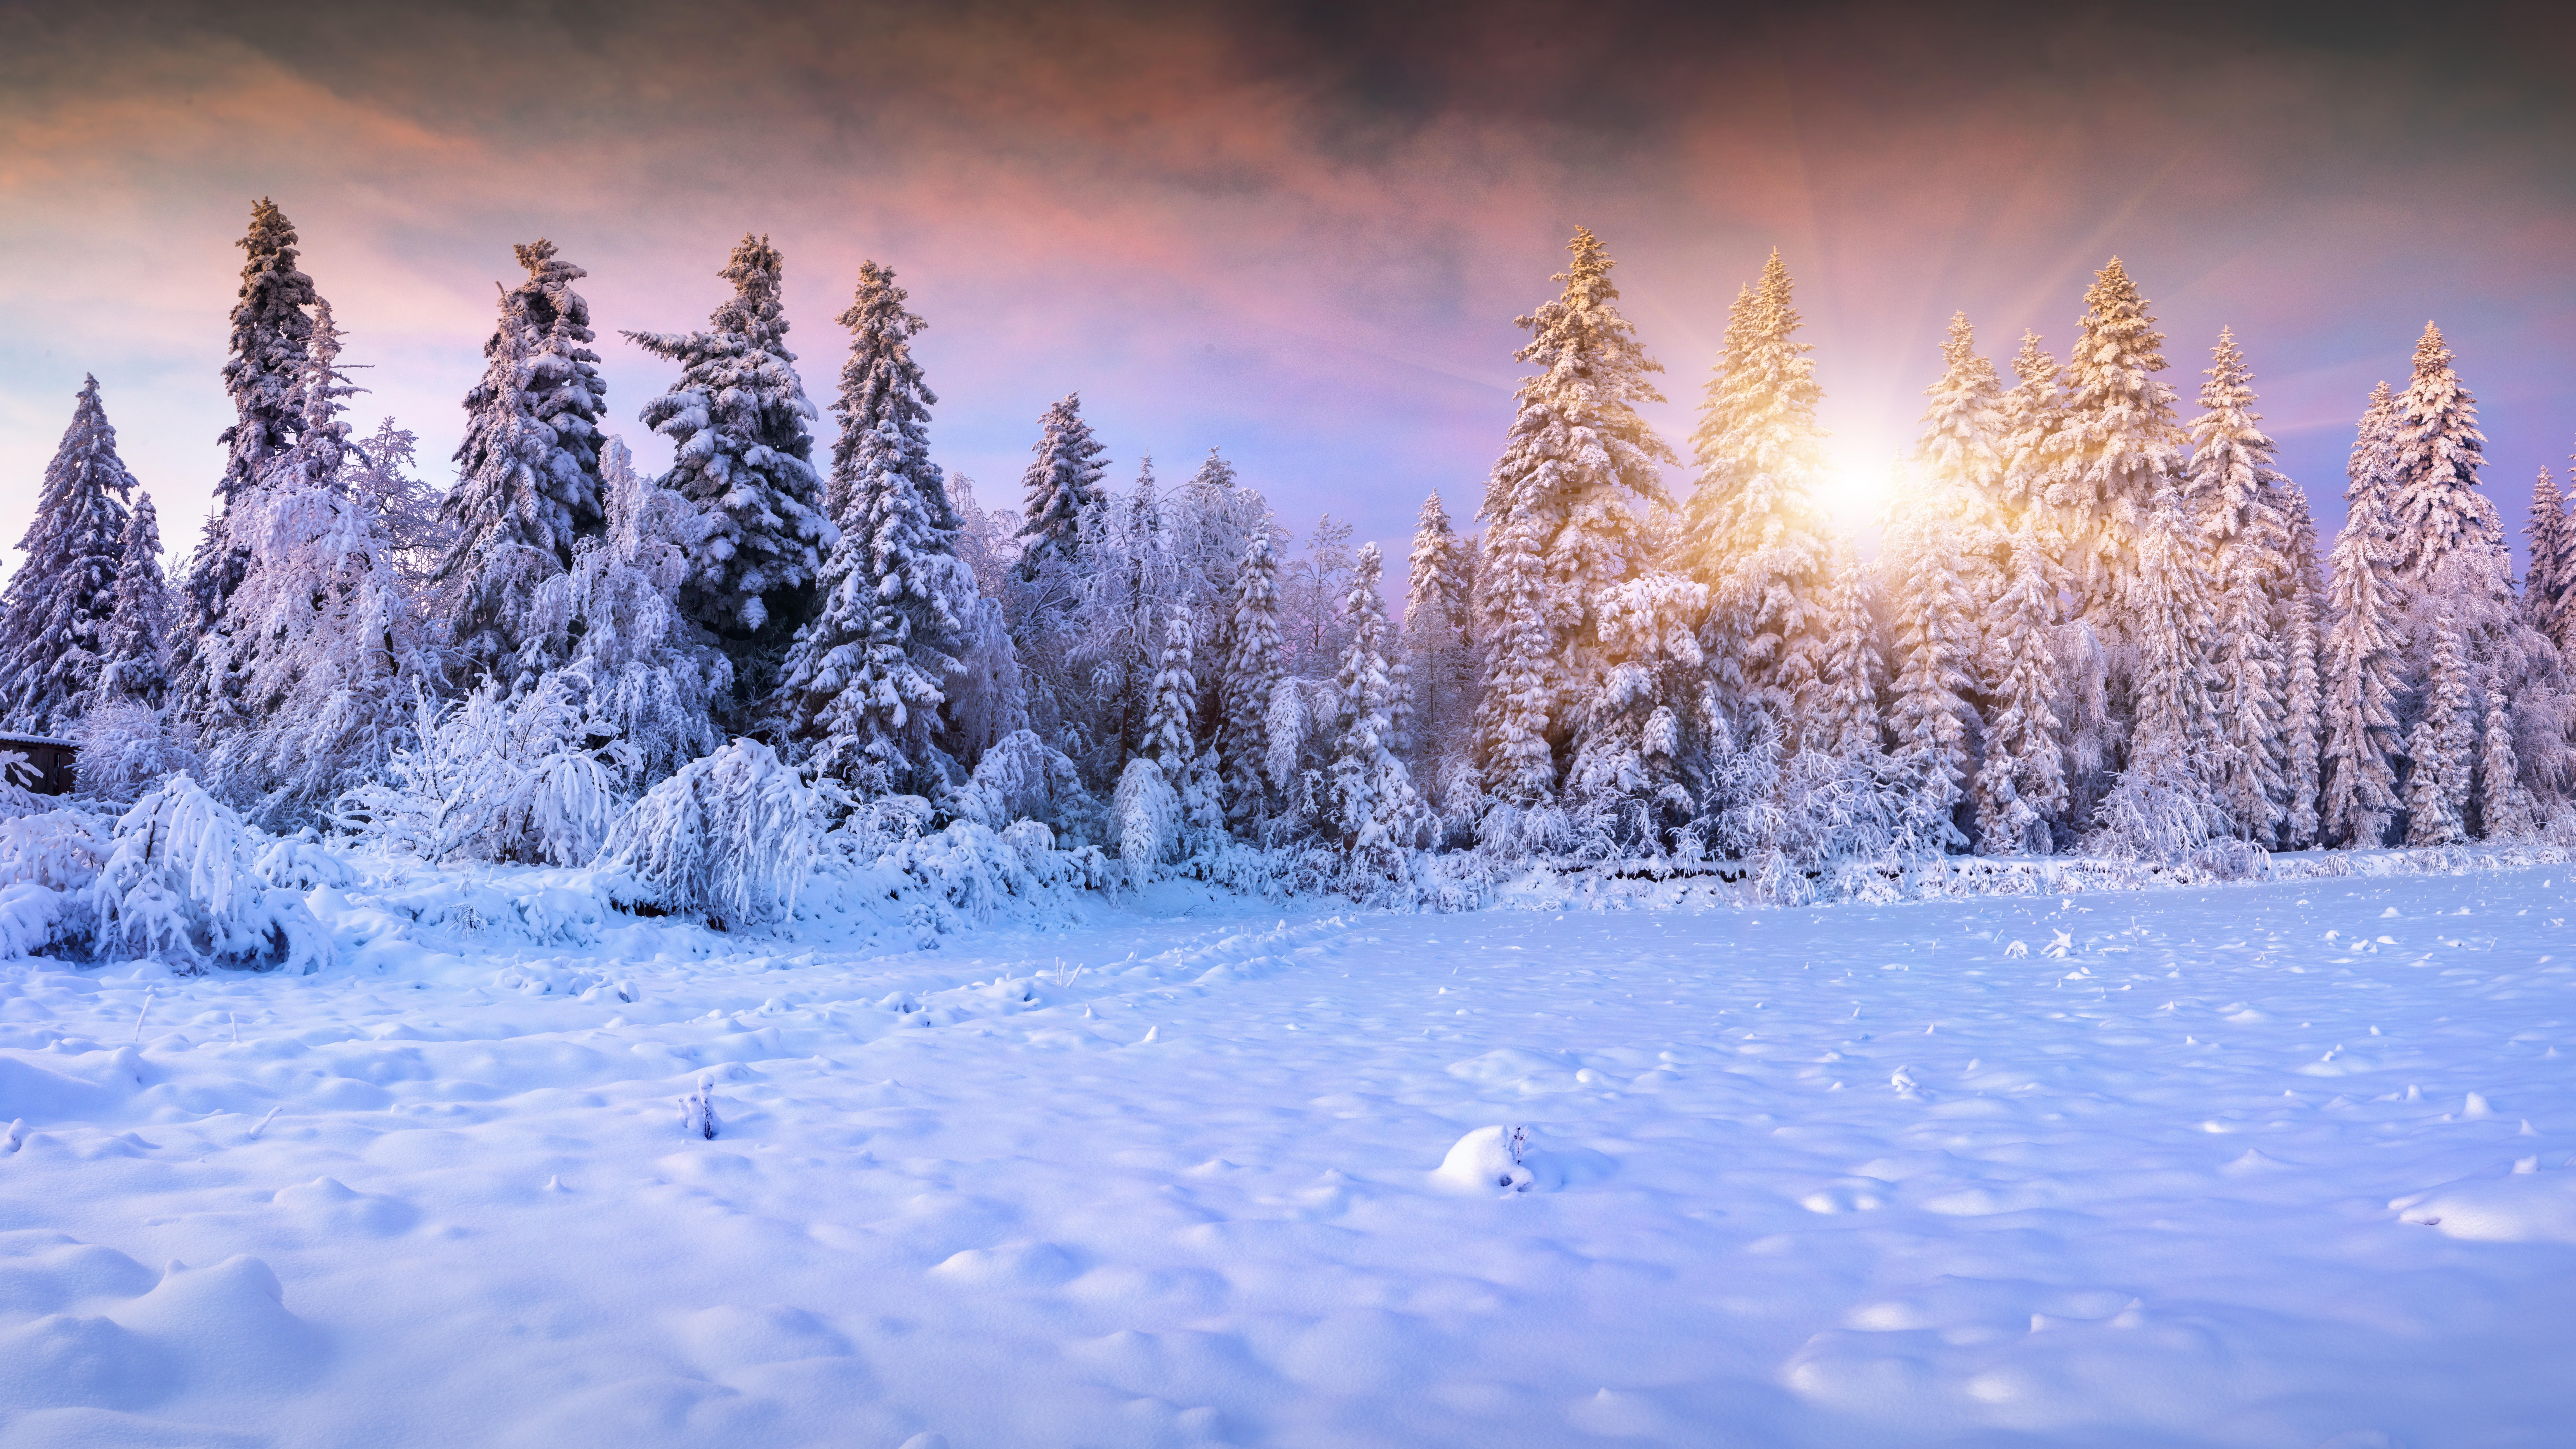 Snow Covered Trees During Daytime. Wallpaper in 7680x4320 Resolution